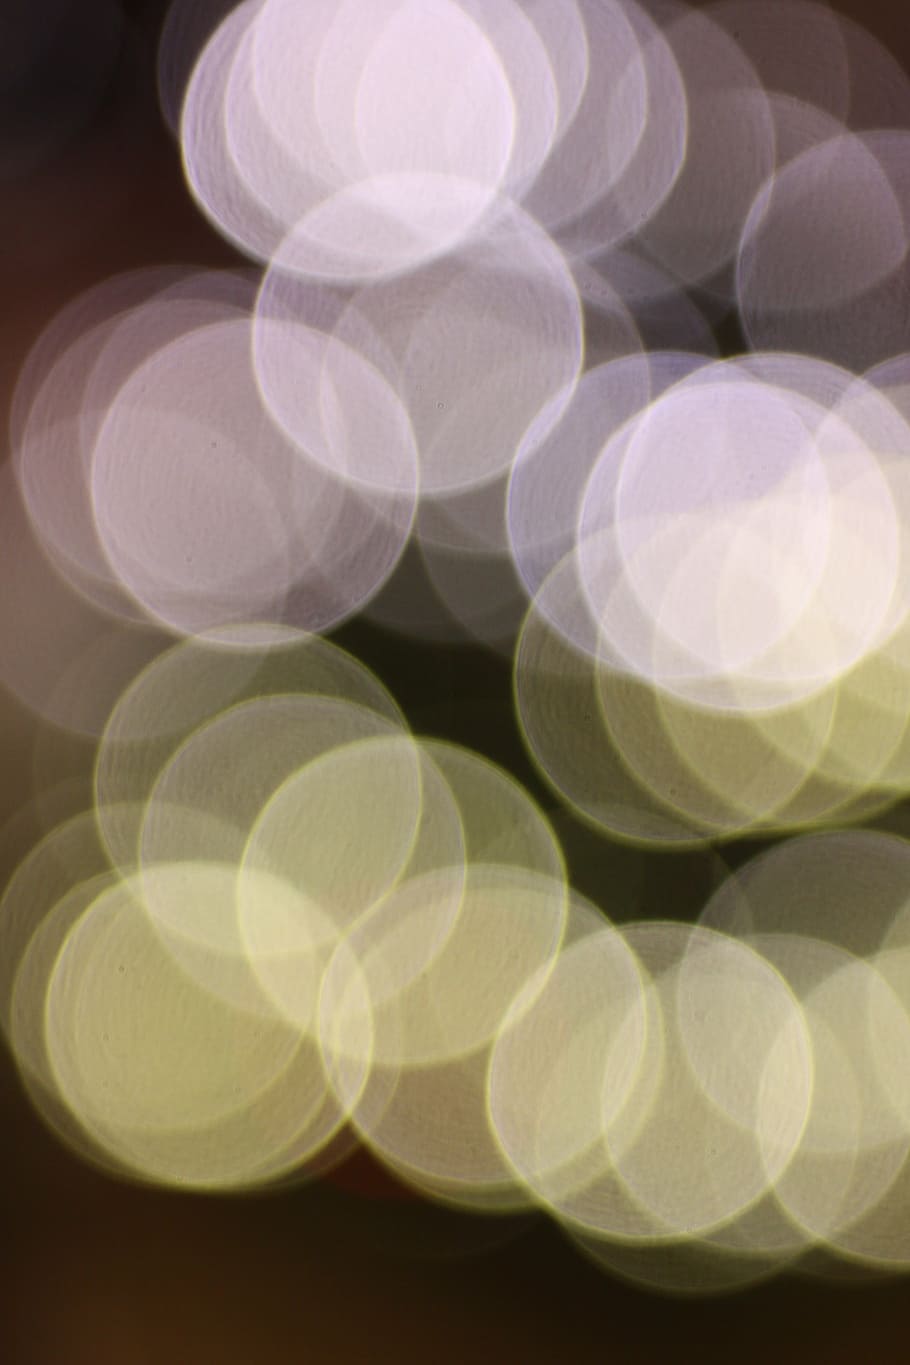 bokeh, lens, out of focus, defocused, backgrounds, abstract, circle, shiny, pattern, night